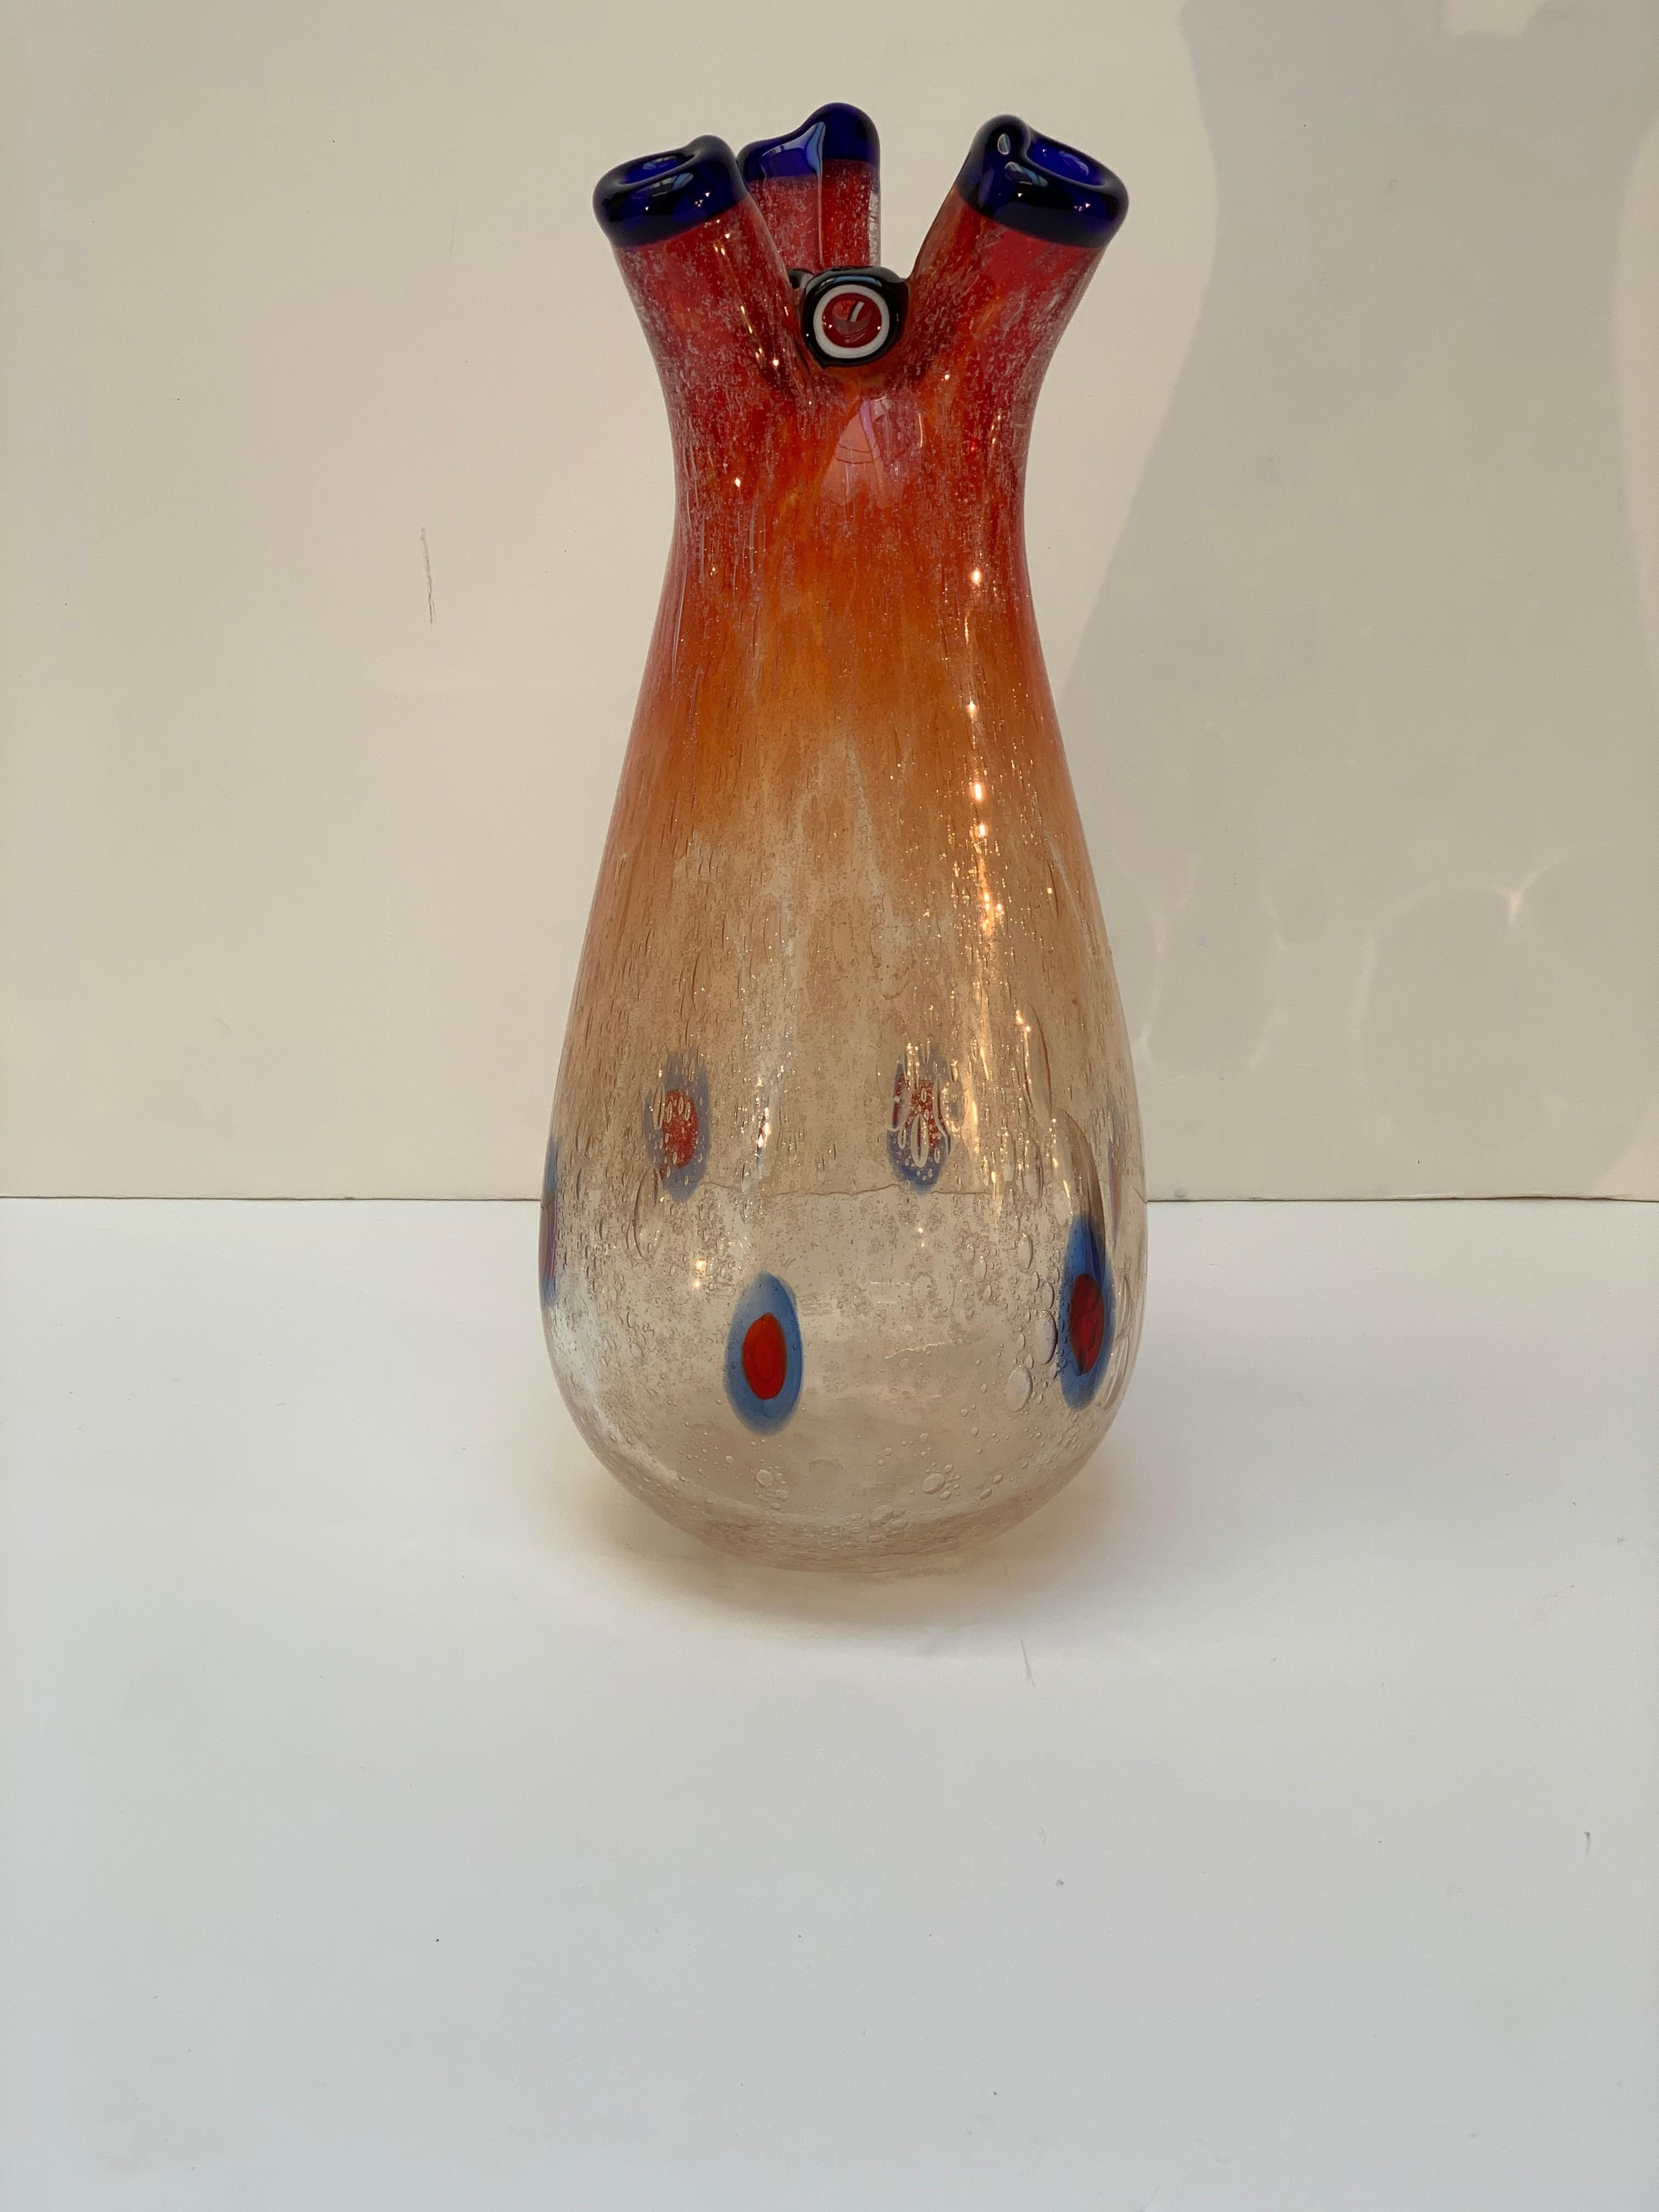 Blown Murano glass vase with three mouths edged with intense blue, body with air bubbles and Murrine coloring in the lower part, this series of vases called 